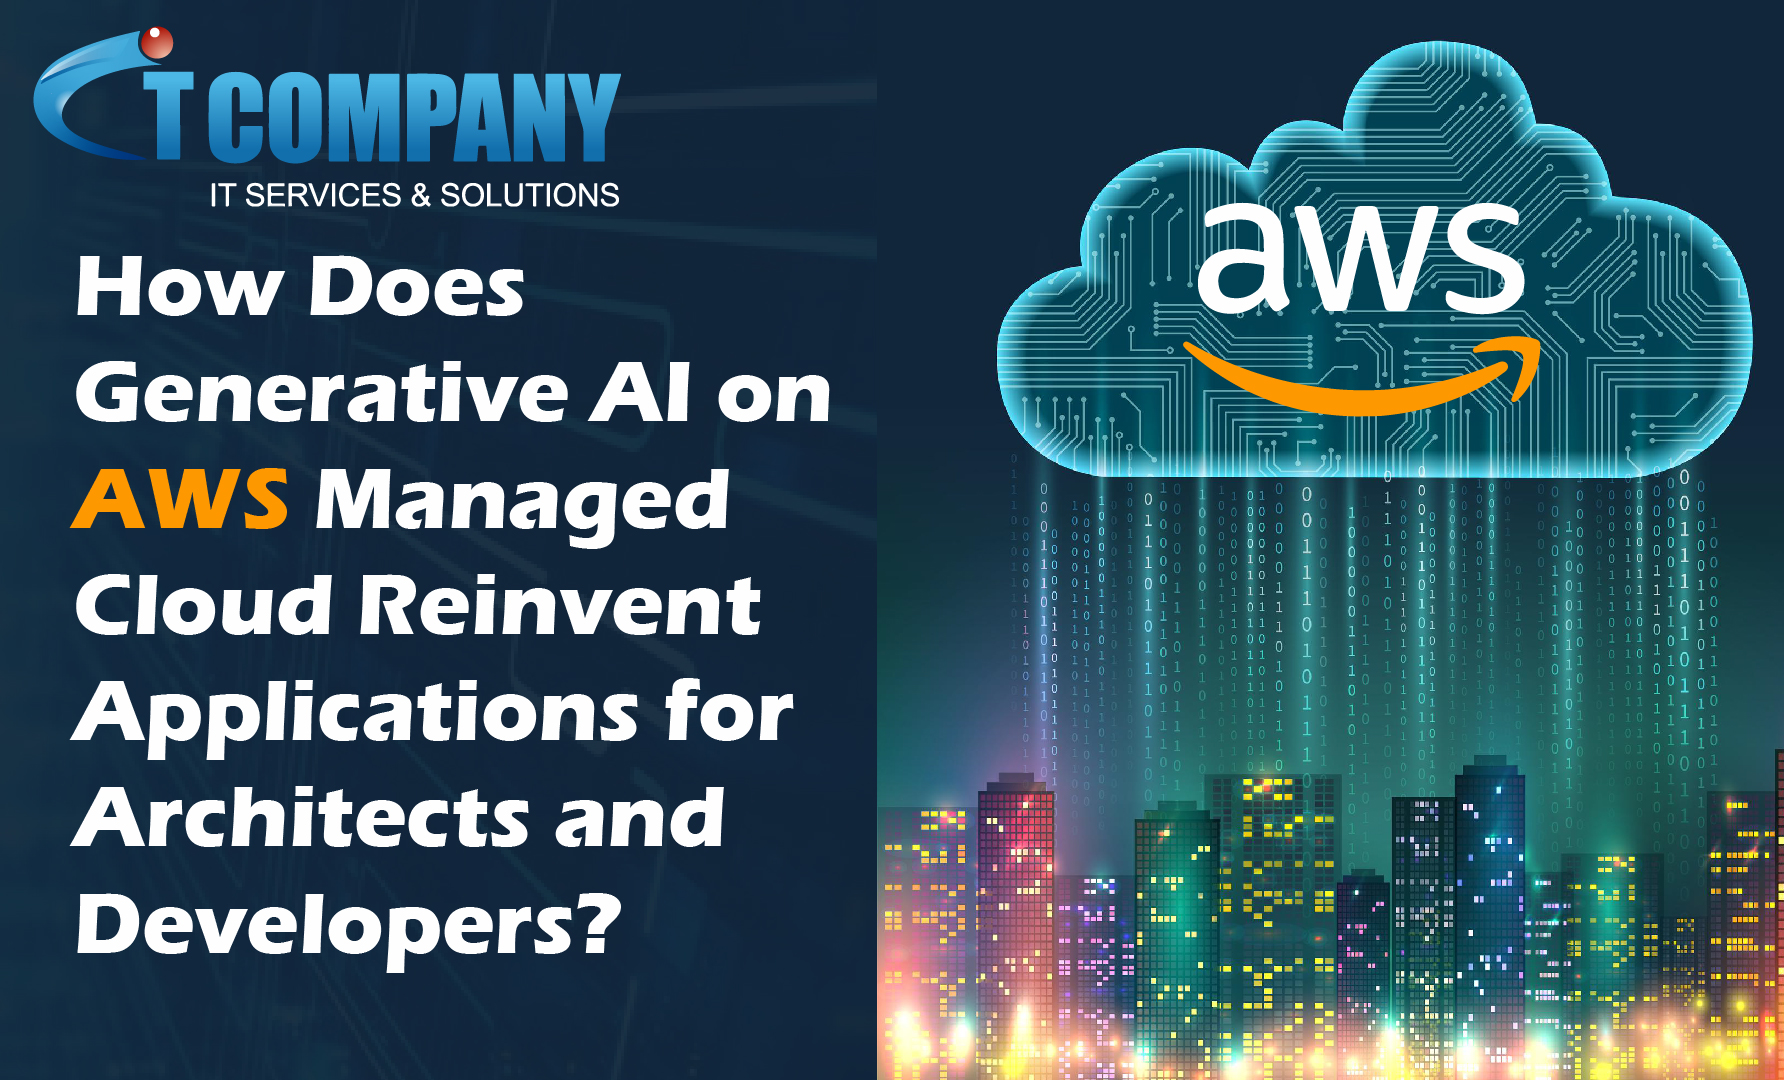 How Does Generative AI on AWS Managed Cloud Reinvent Applications for Architects and Developers?